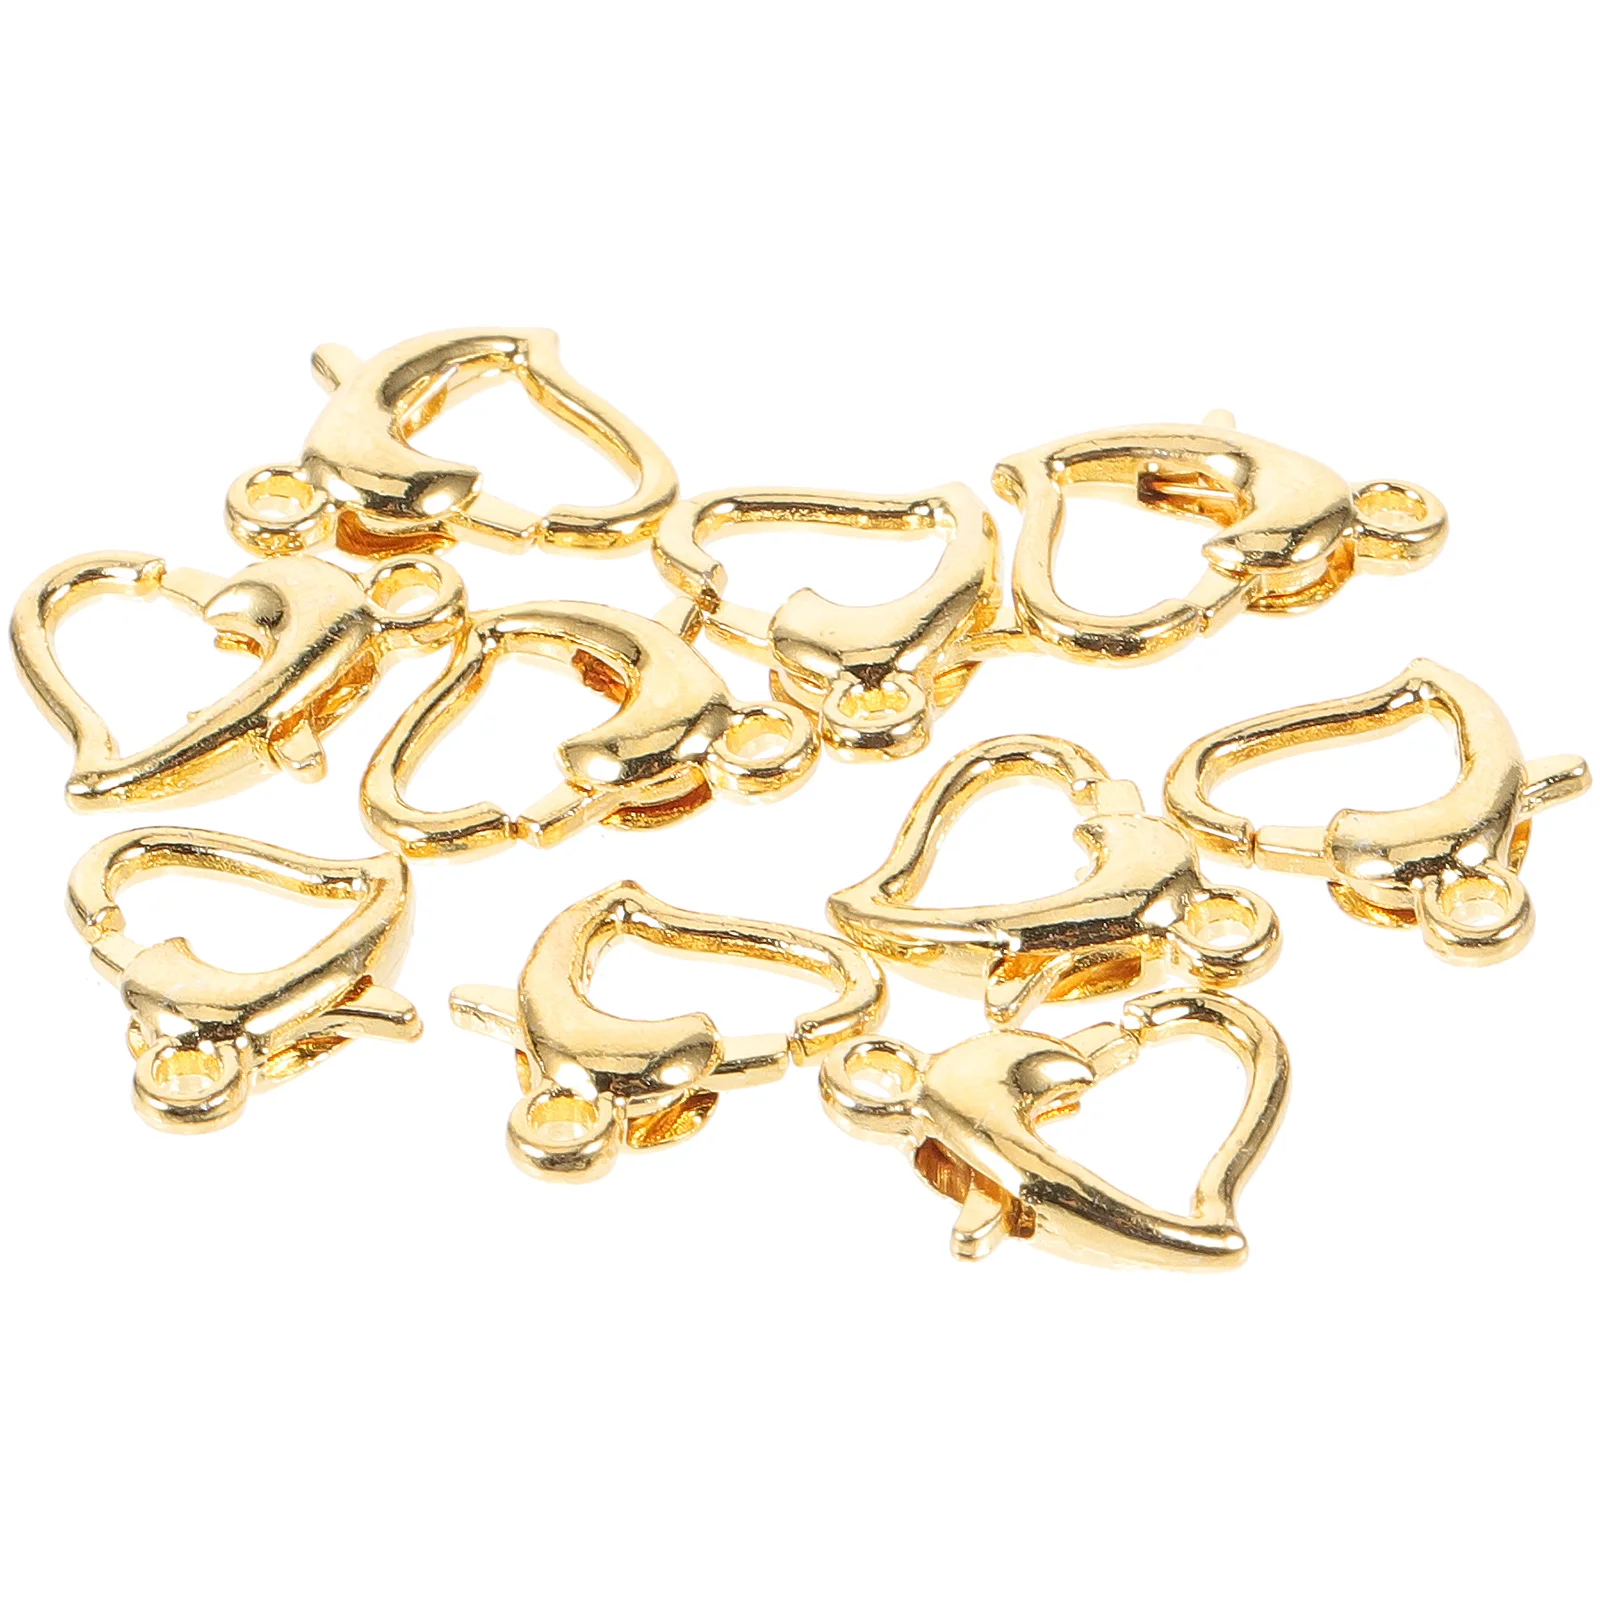 

10pcs Diy Lobster Clasps Jewelry Connectors Lobster Clasps Jewelry Making Materials